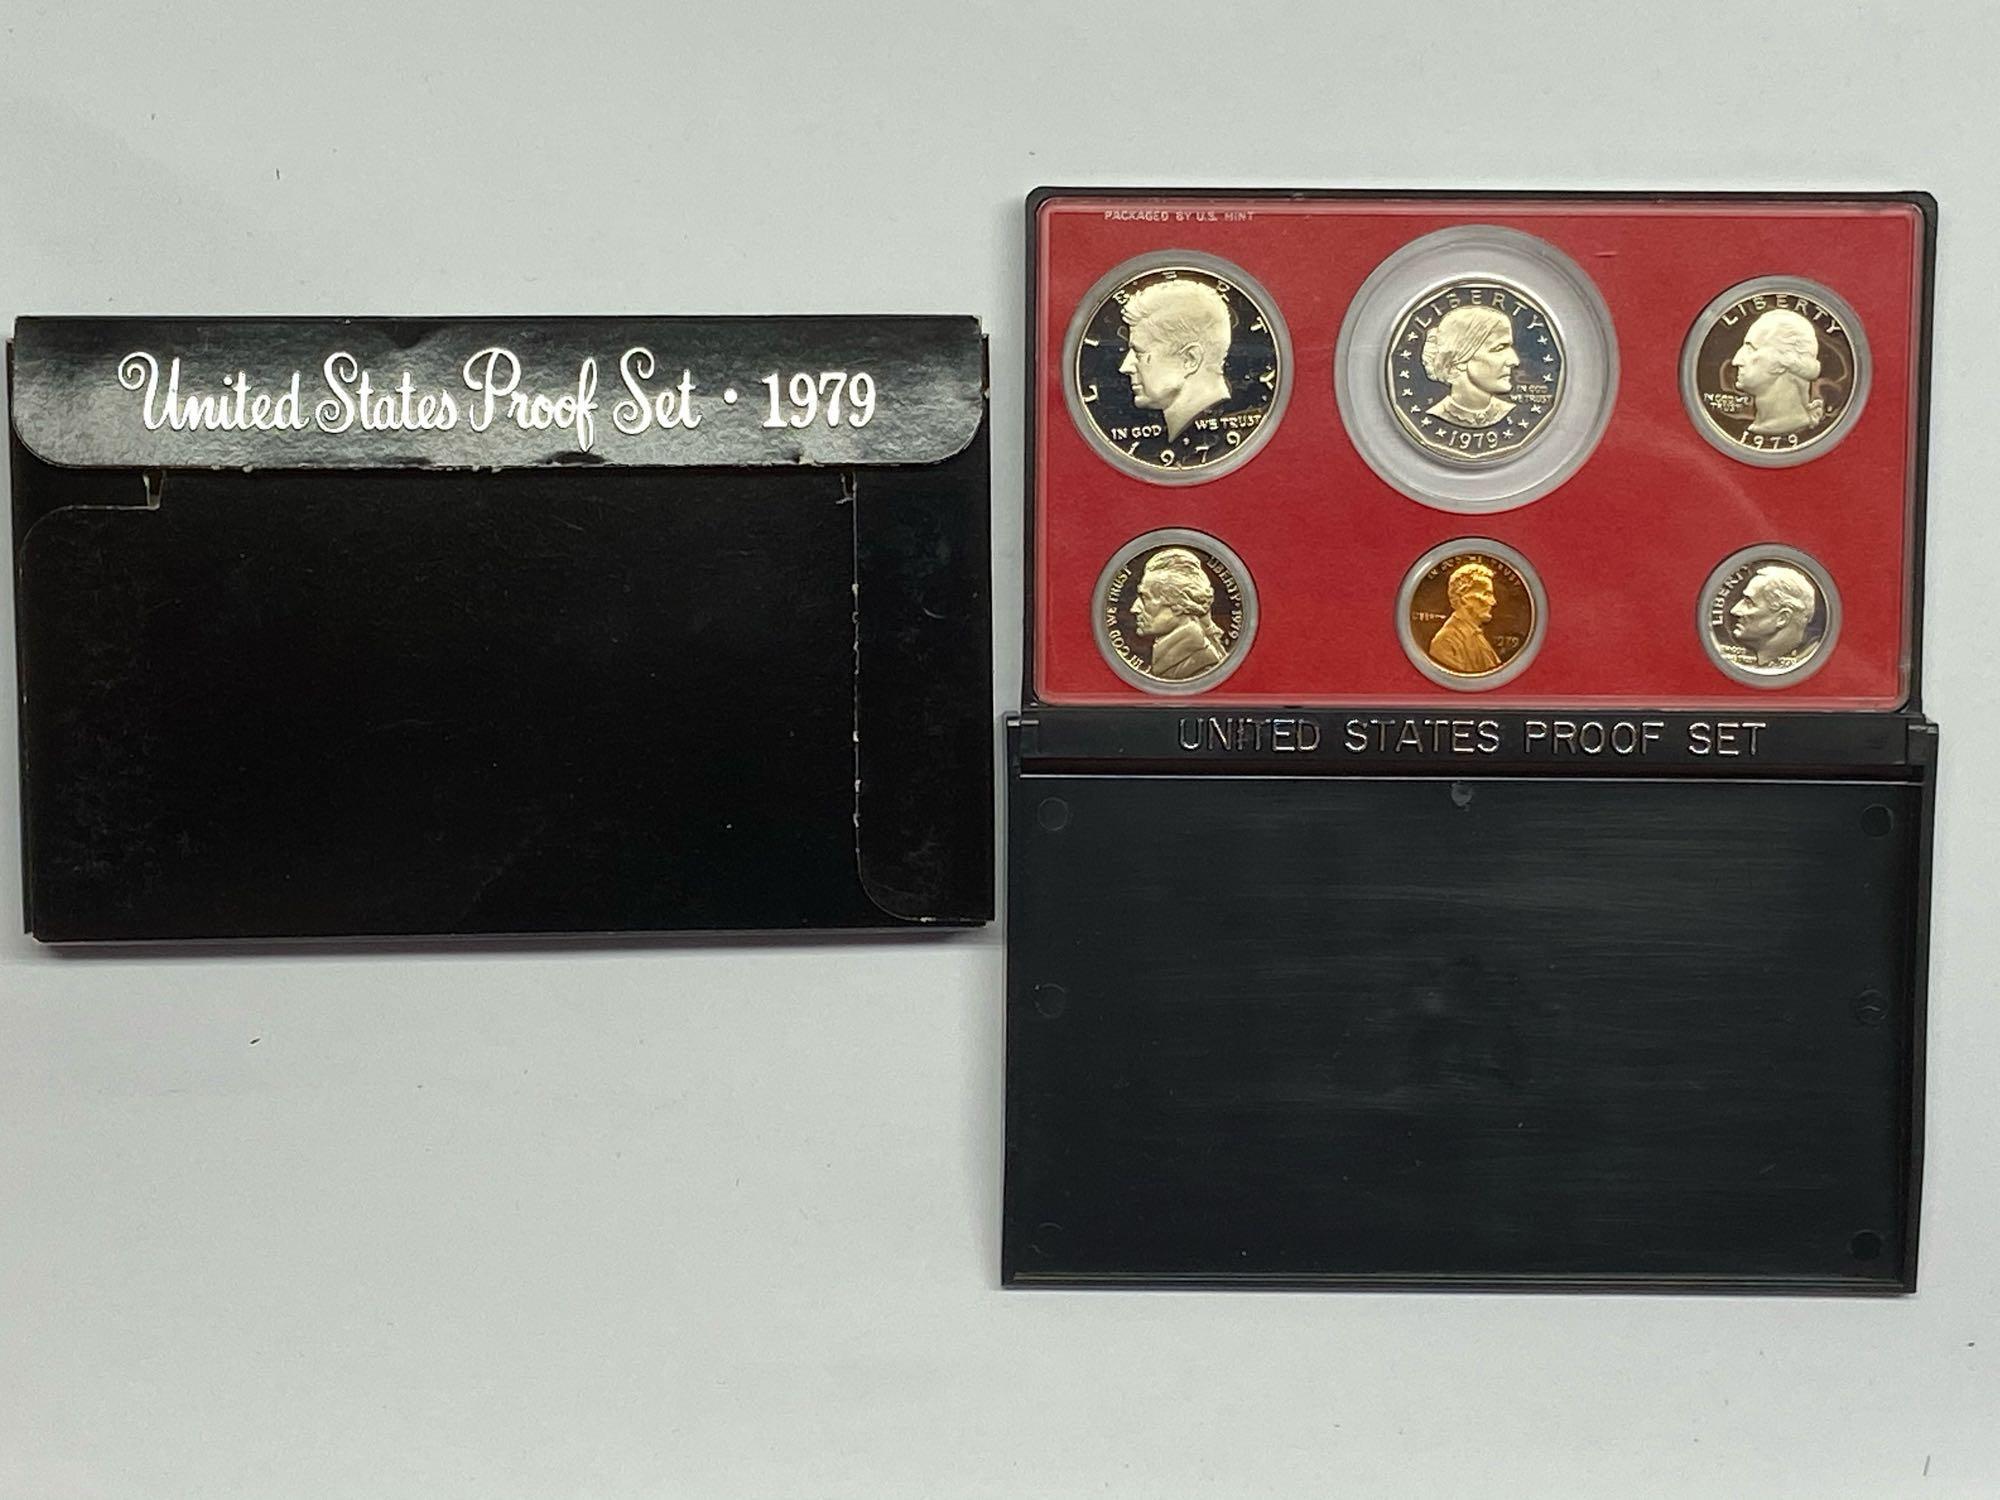 Collection of 14 United States Mint Proof Sets of Coins 1968-1992 in Original Packaging